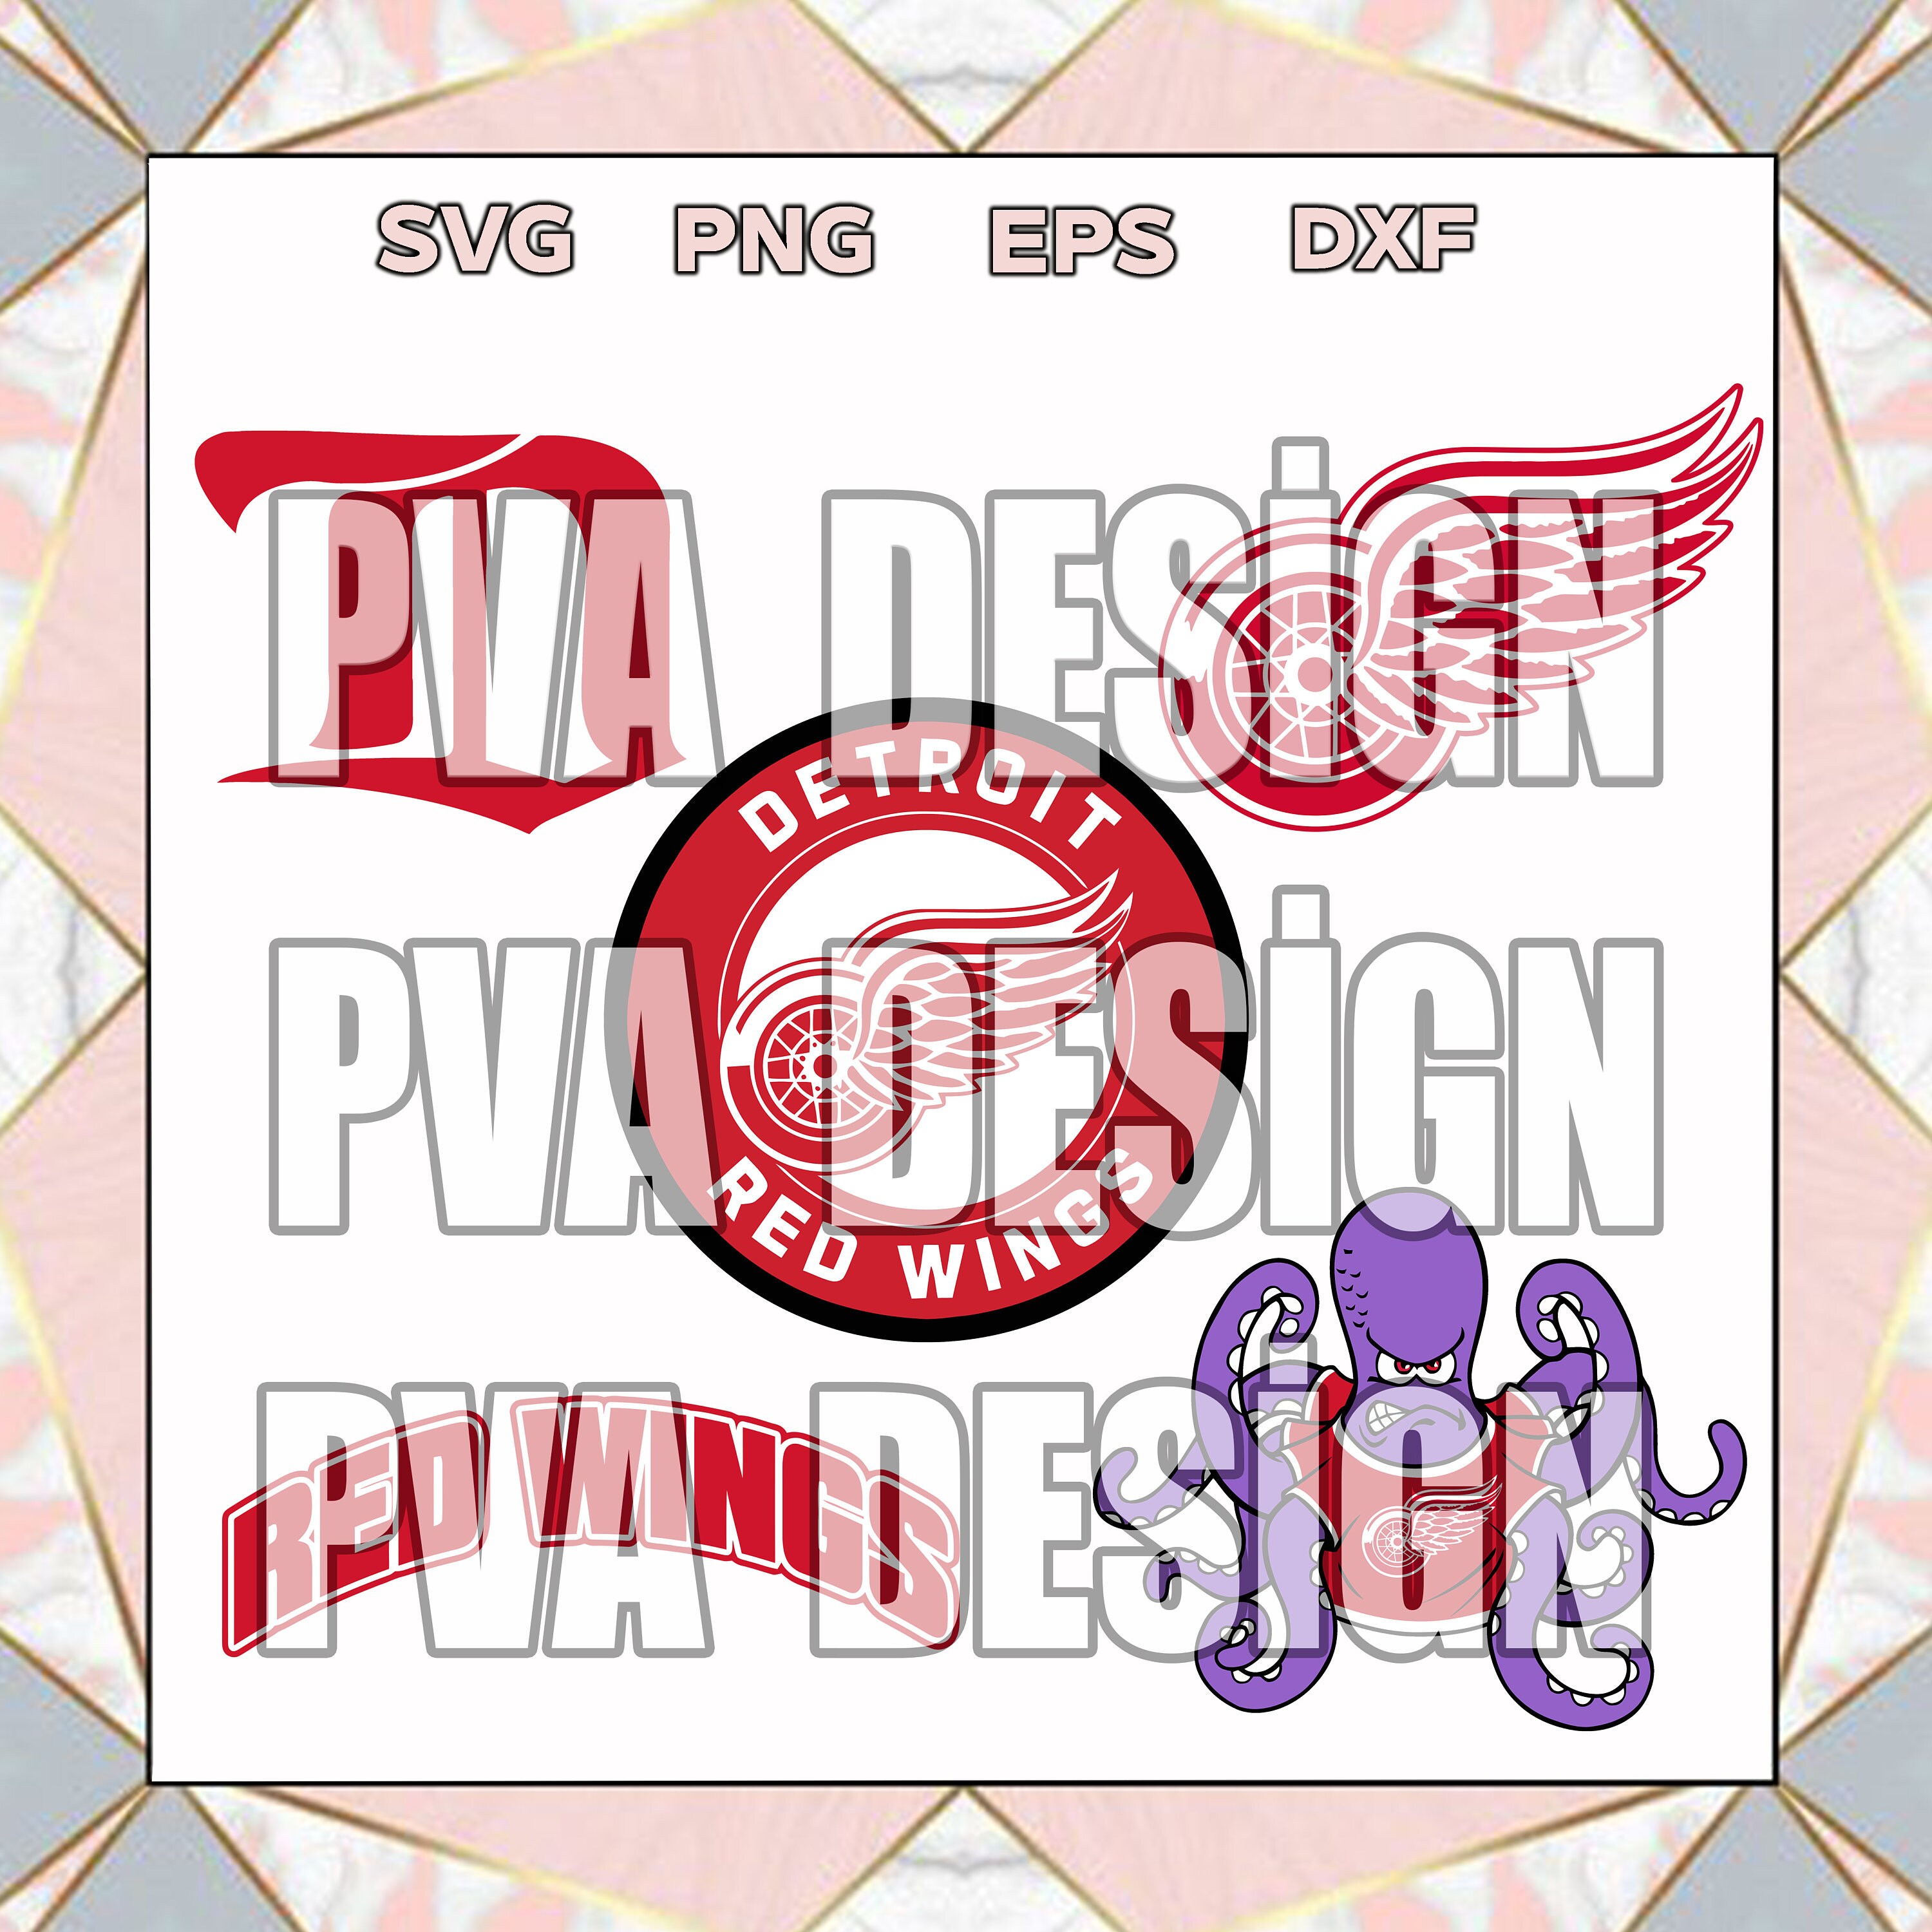 NHL Detroit Red Wings, Detroit Red Wings SVG Vector, Detroit Red Wings  Clipart, Detroit Red Wings Ice Hockey Kit SVG, DXF, PNG, EPS Instant  Download NHL-Files For Silhouette, Files For Clipping. 